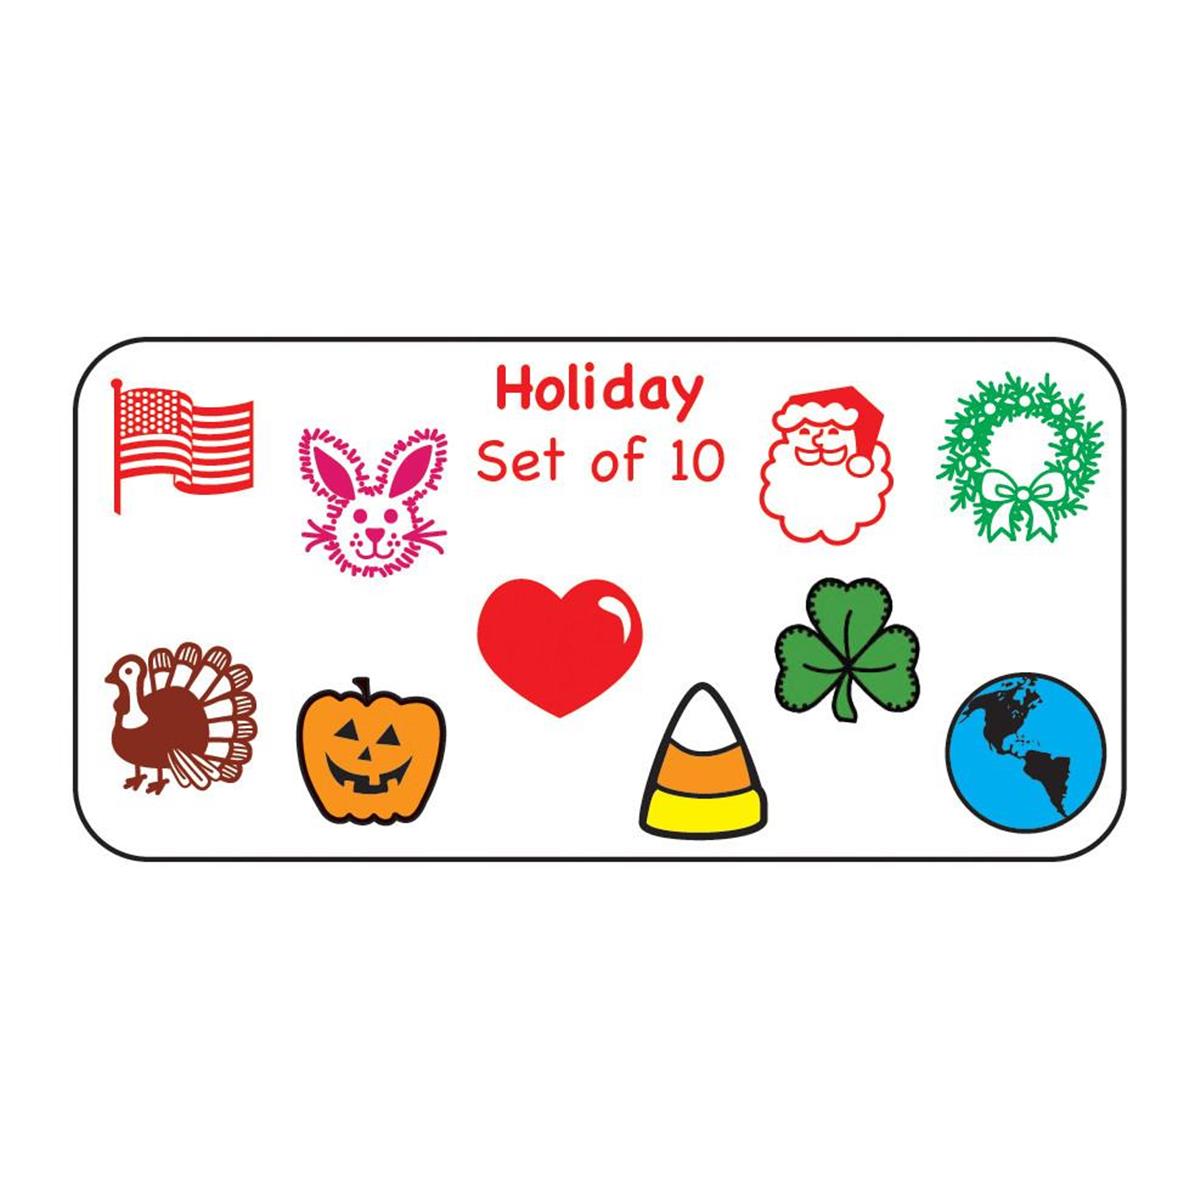 Picture of Creative Shapes Etc SE-0490 0.5 x 0.5 in. Incentive Stamp Set, Holiday - 10 Count